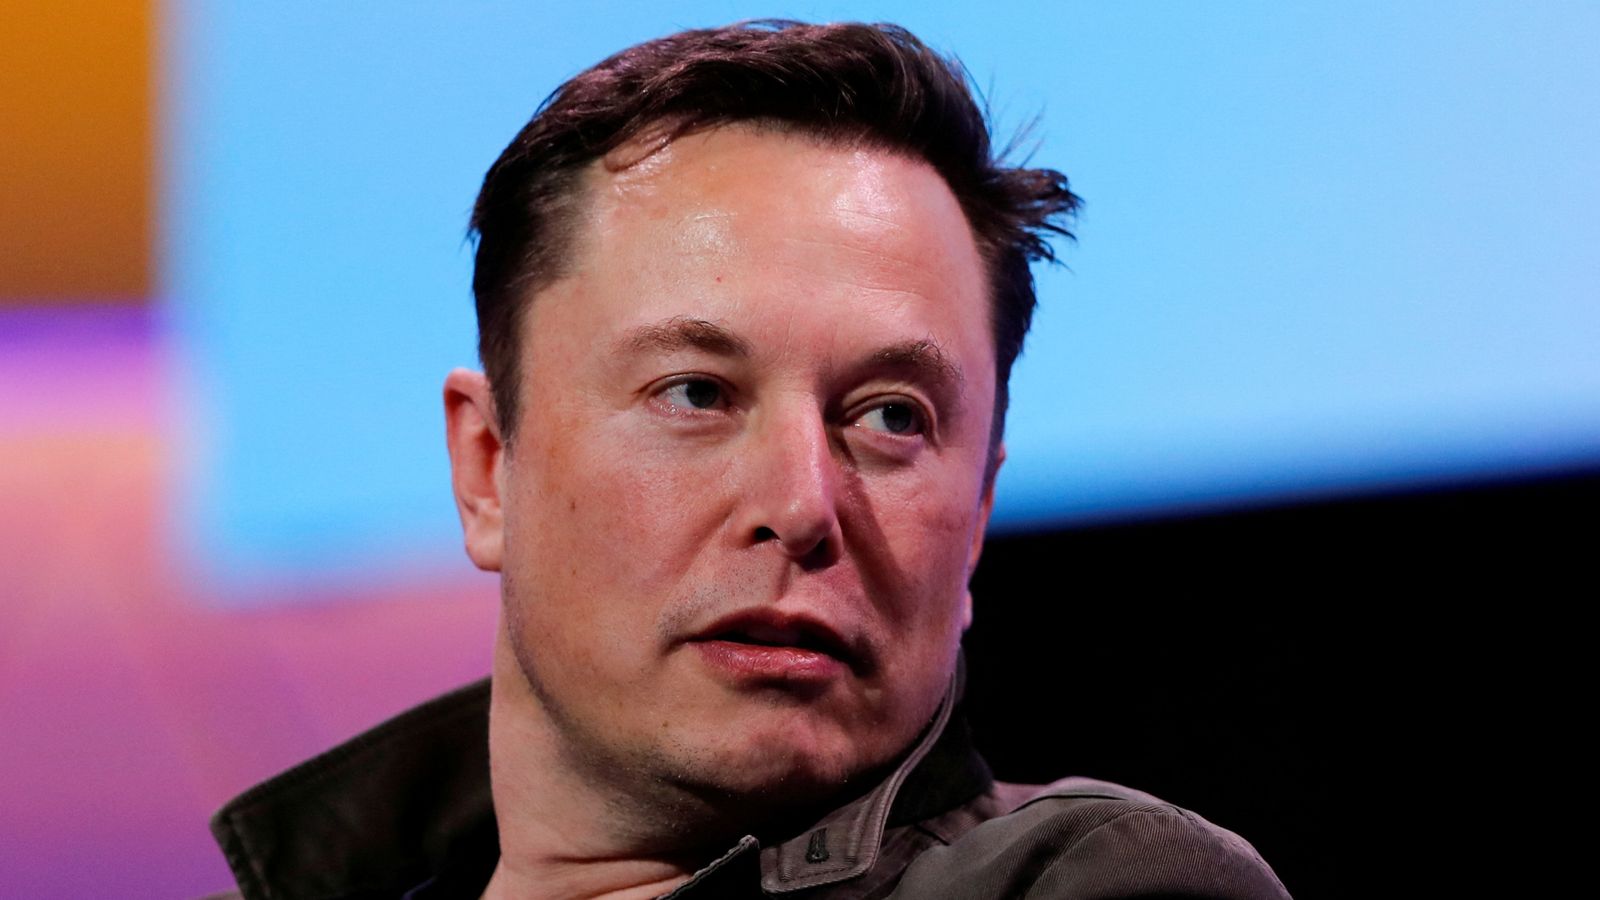 Elon Musk's friends say Twitter targeting them in 'giant harassing fishing expedition'